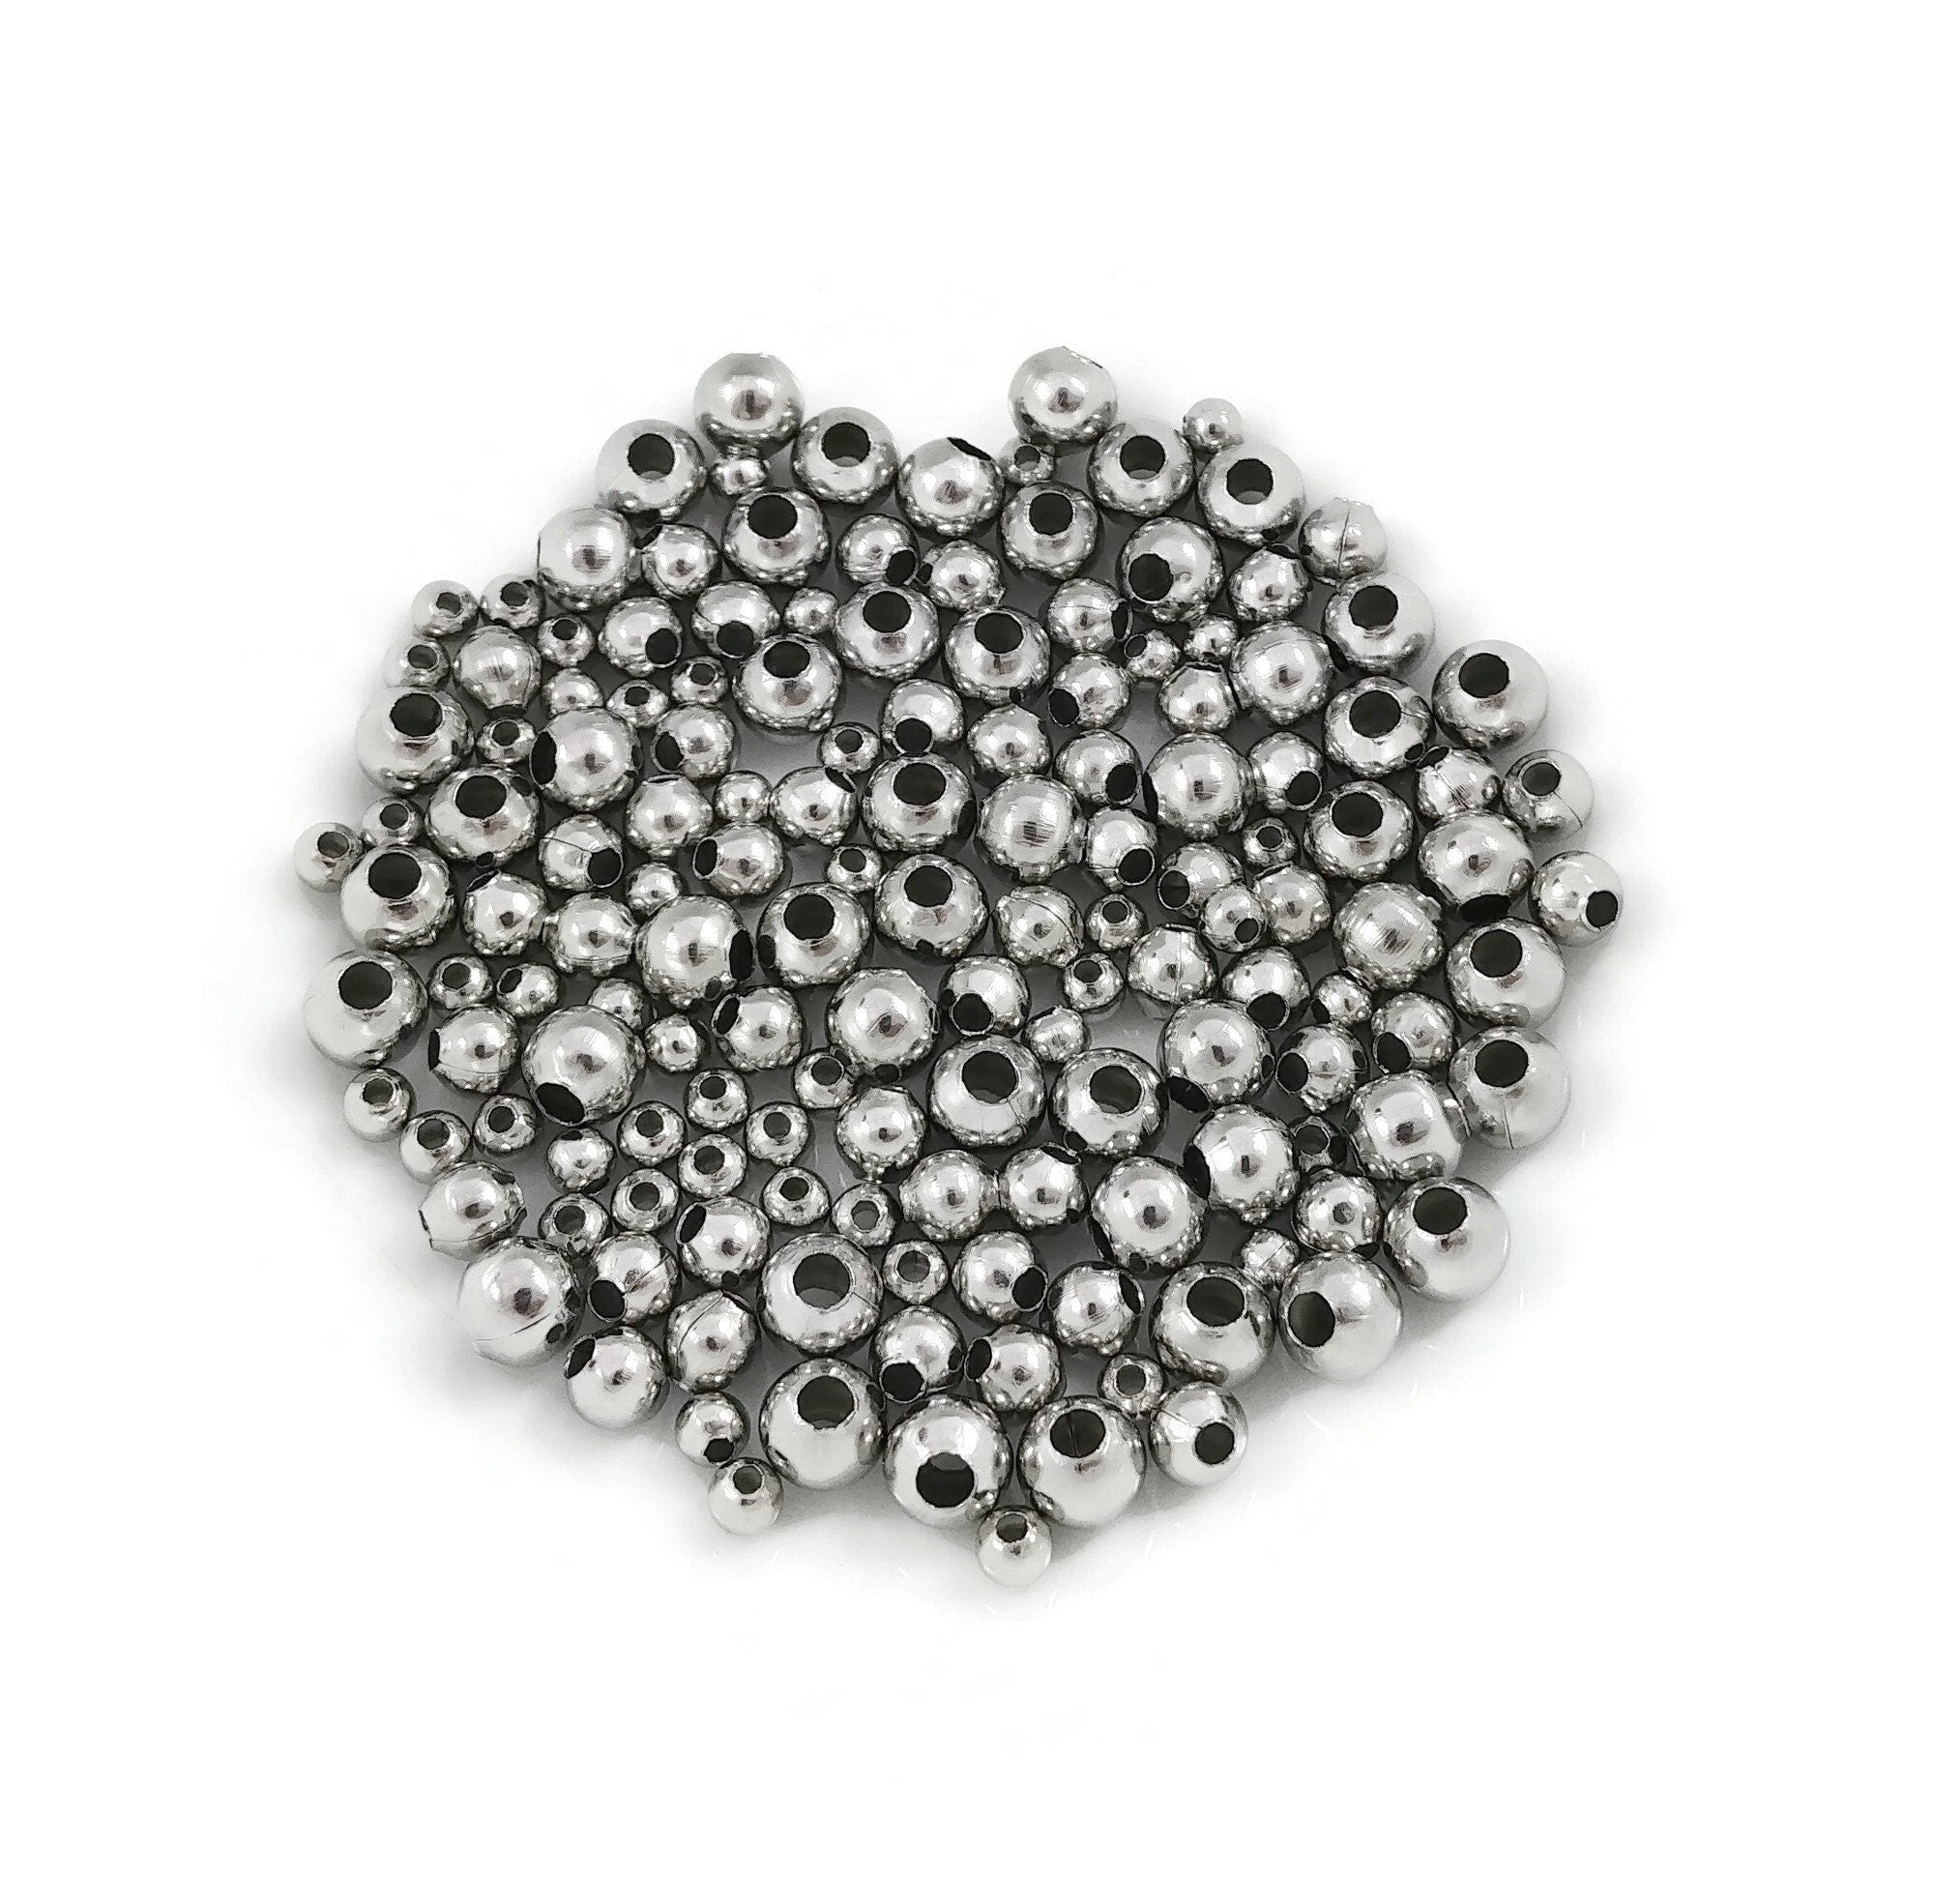 Mandala Craft Metal Spacer Beads for Jewelry Making Bulk Pack – Round  Silver Spacer Beads Gold Beads – 4mm 5mm Bead Spacers for Jewelry Making  1500